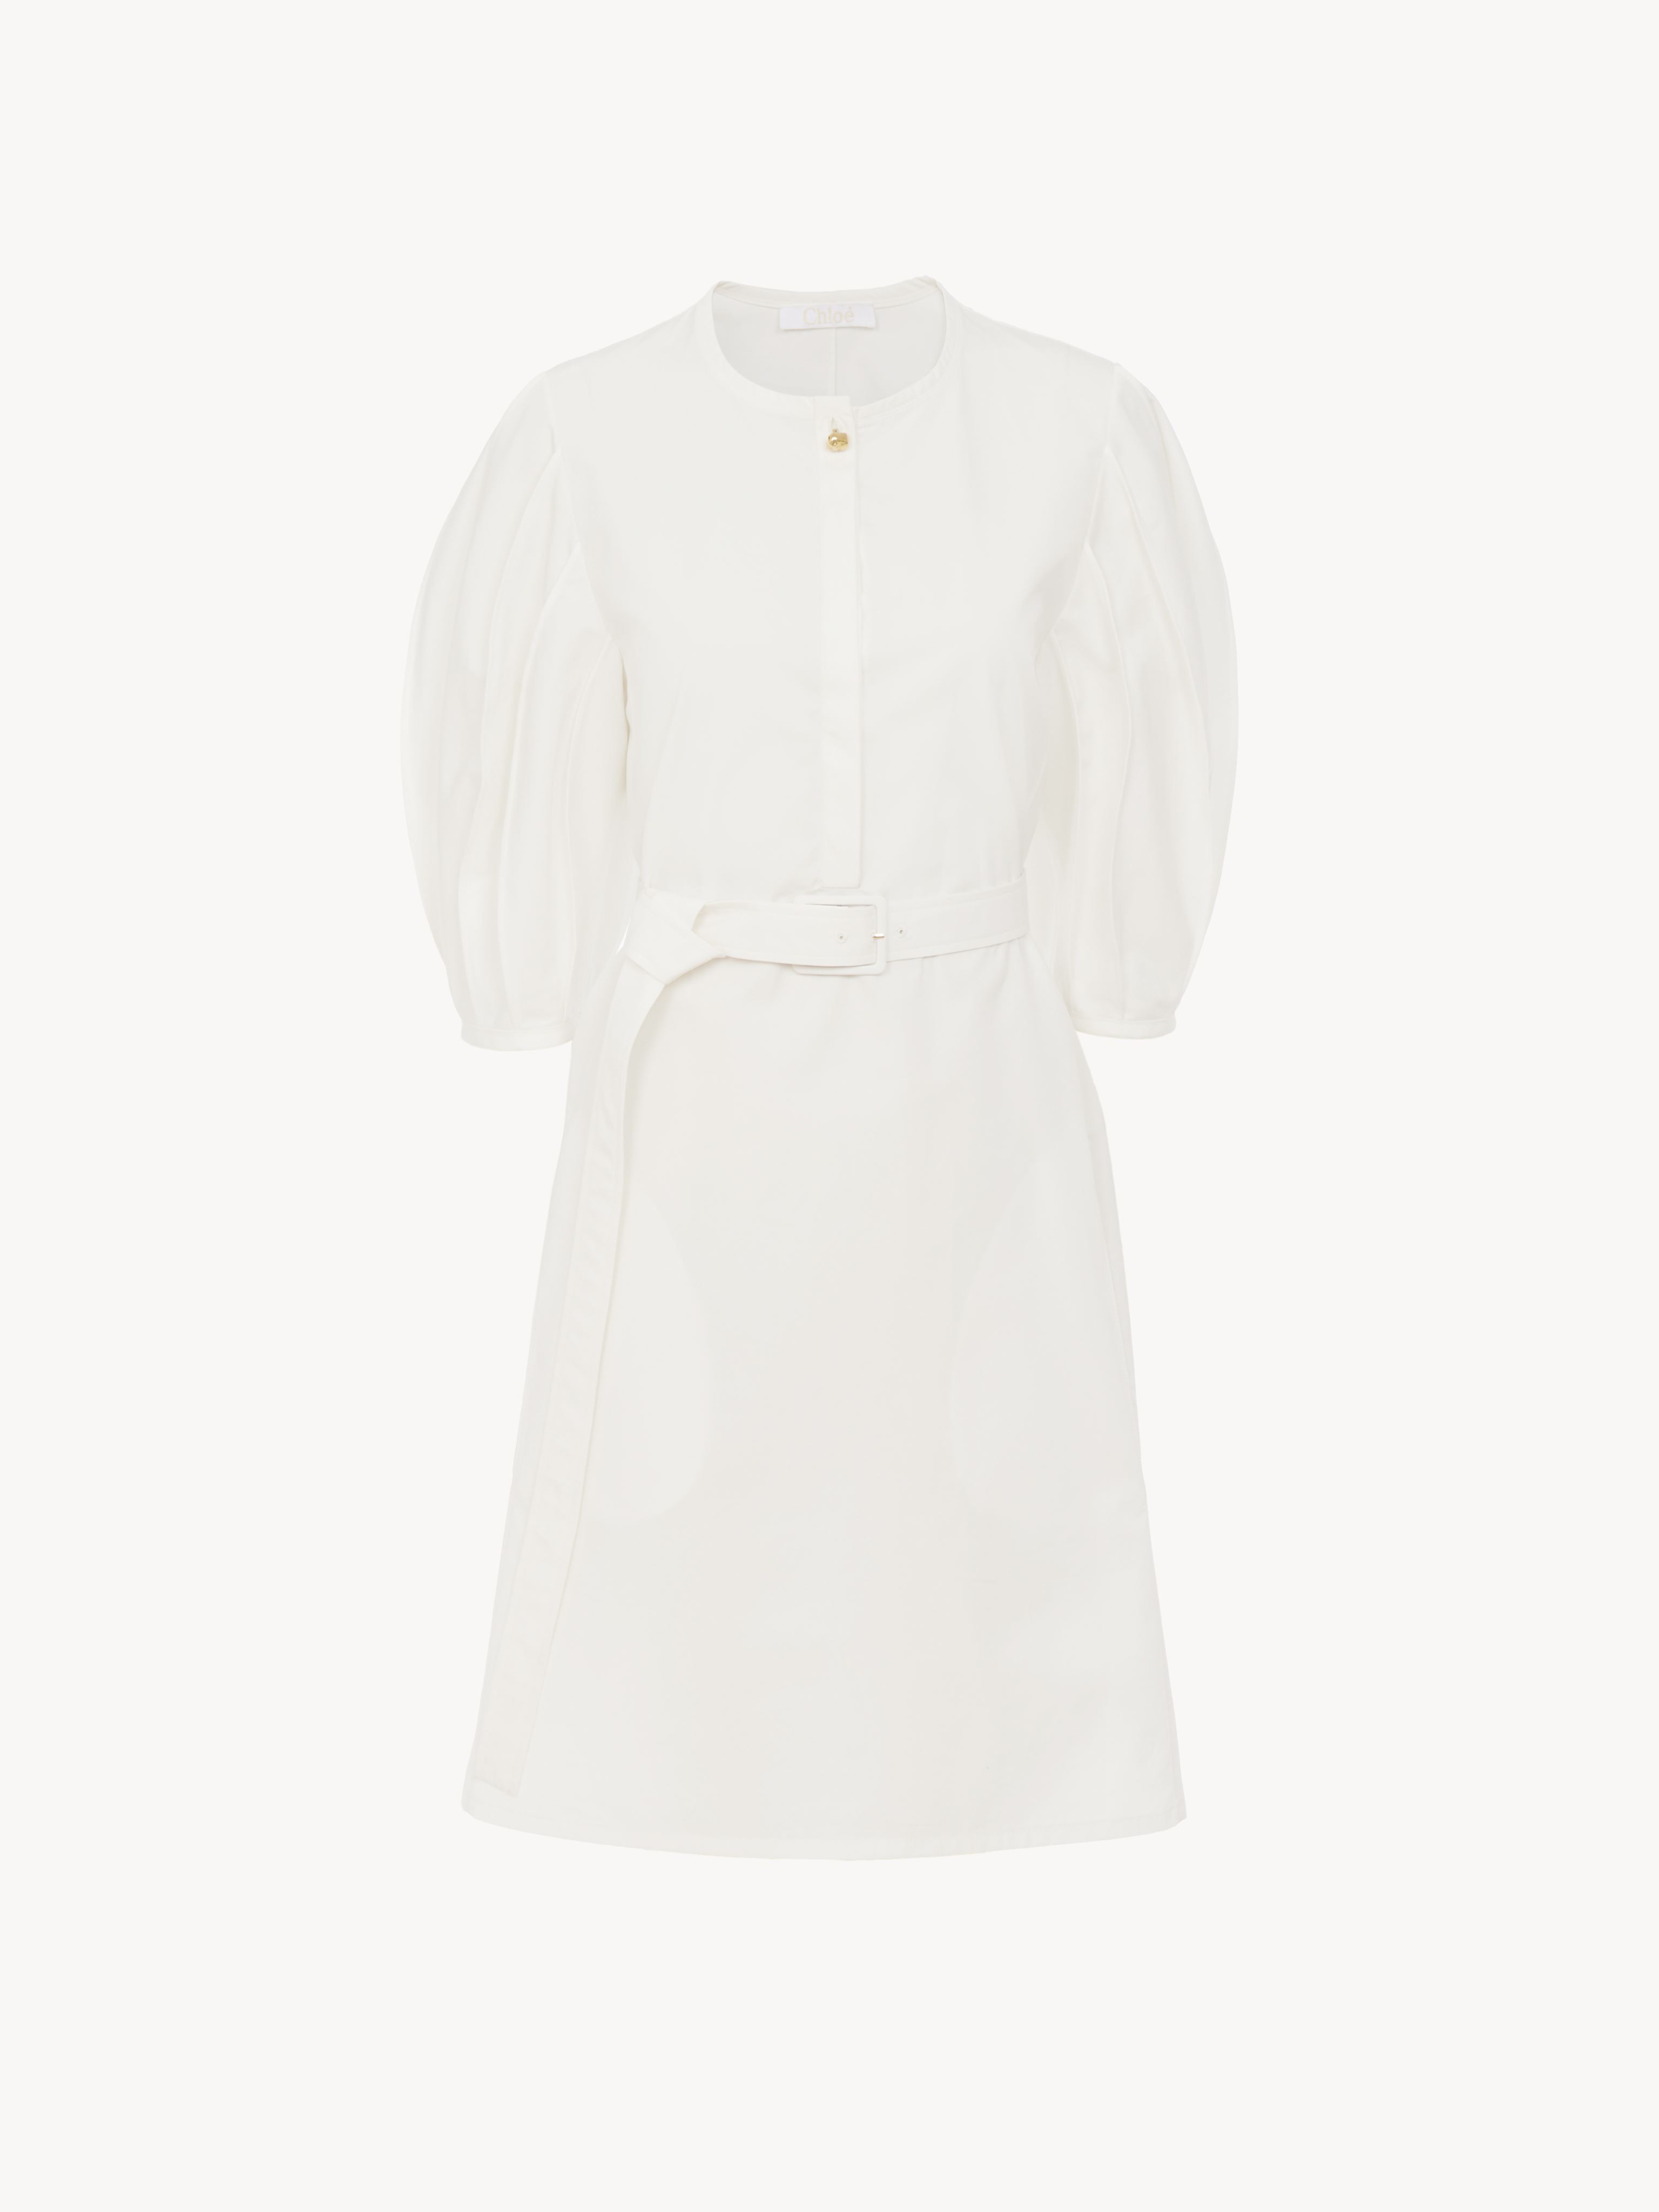 Chloé Robe Chemise Courte Manches « Lanterne » Femme Brun Taille 36 100% Coton, Pinctada Maxima, Farmed, C In Brown